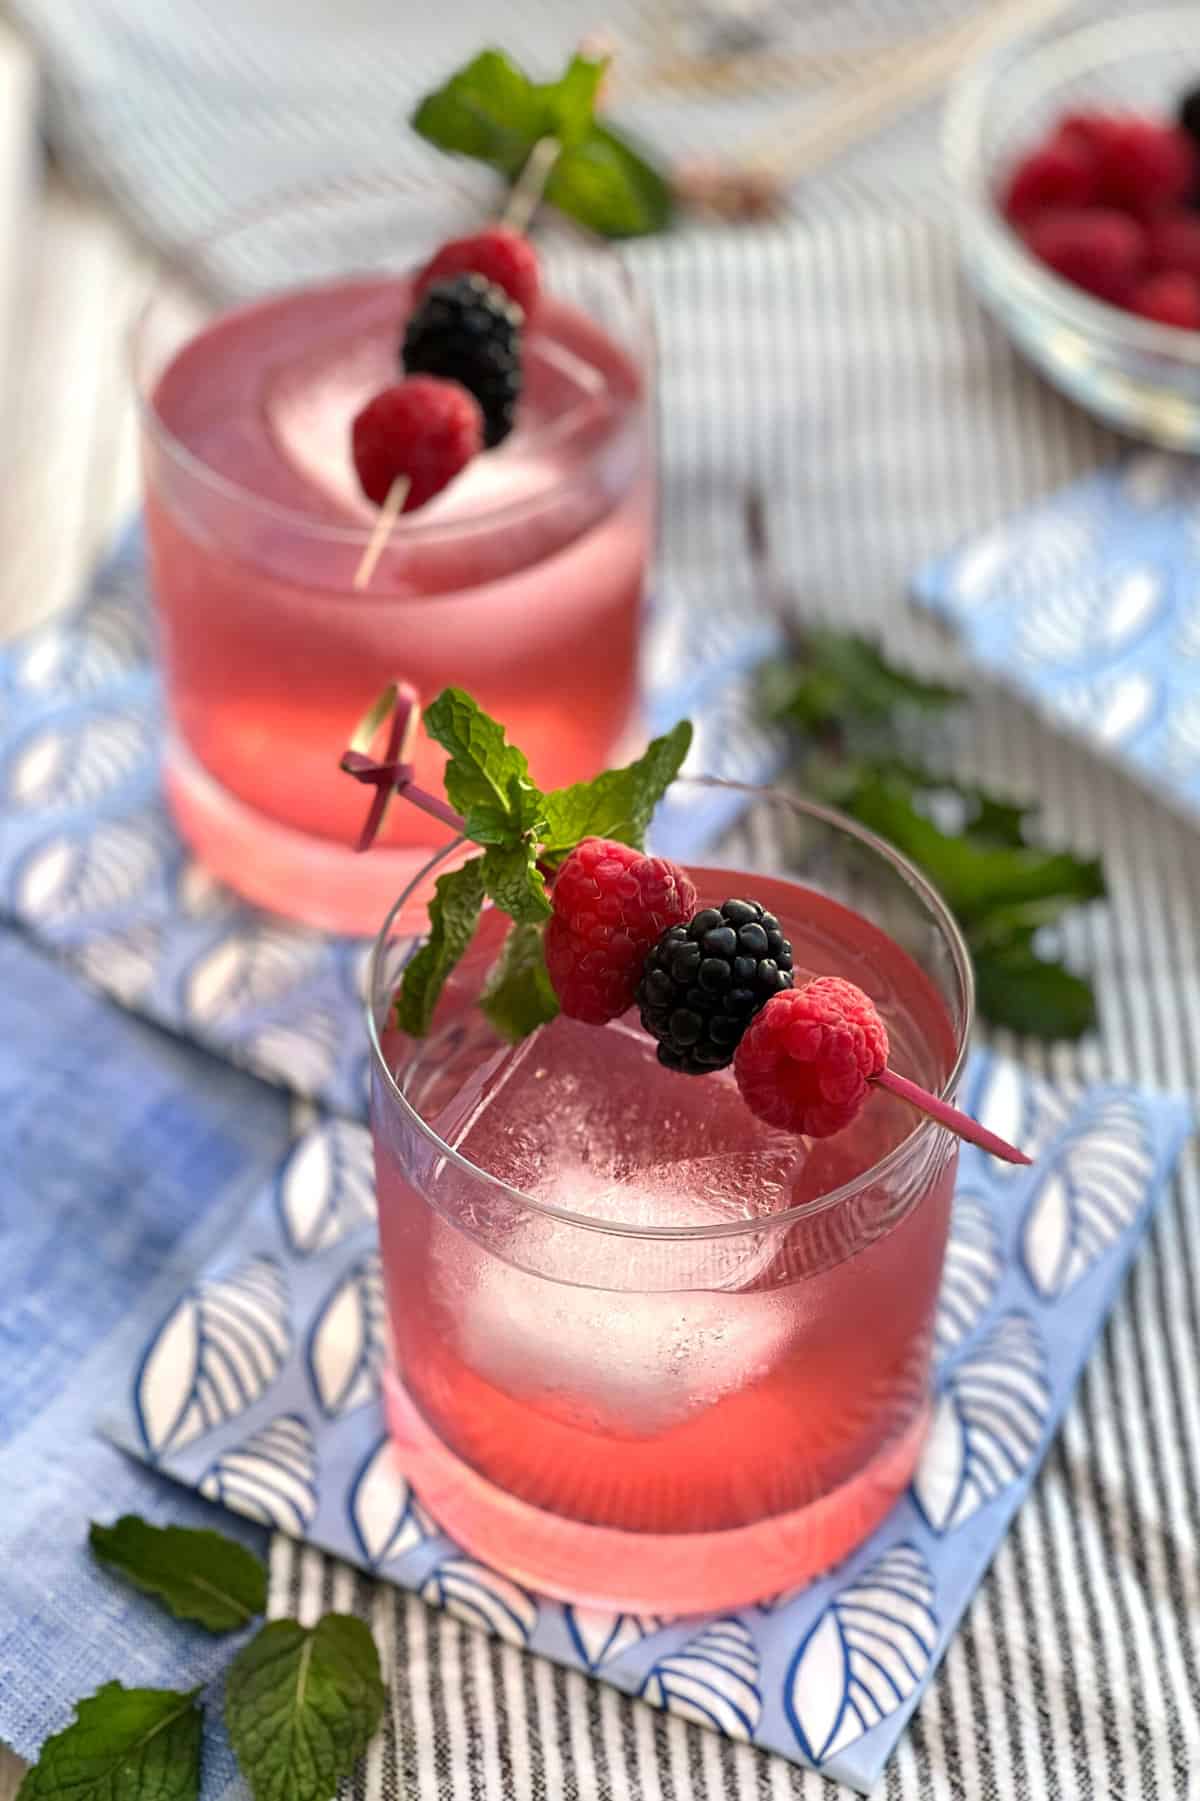 Two glass tumblers, each filled with a large ice cube and a berry shrub drink, garnished with a toothpick holding a  sprig of mint, two raspberries and one blackberry